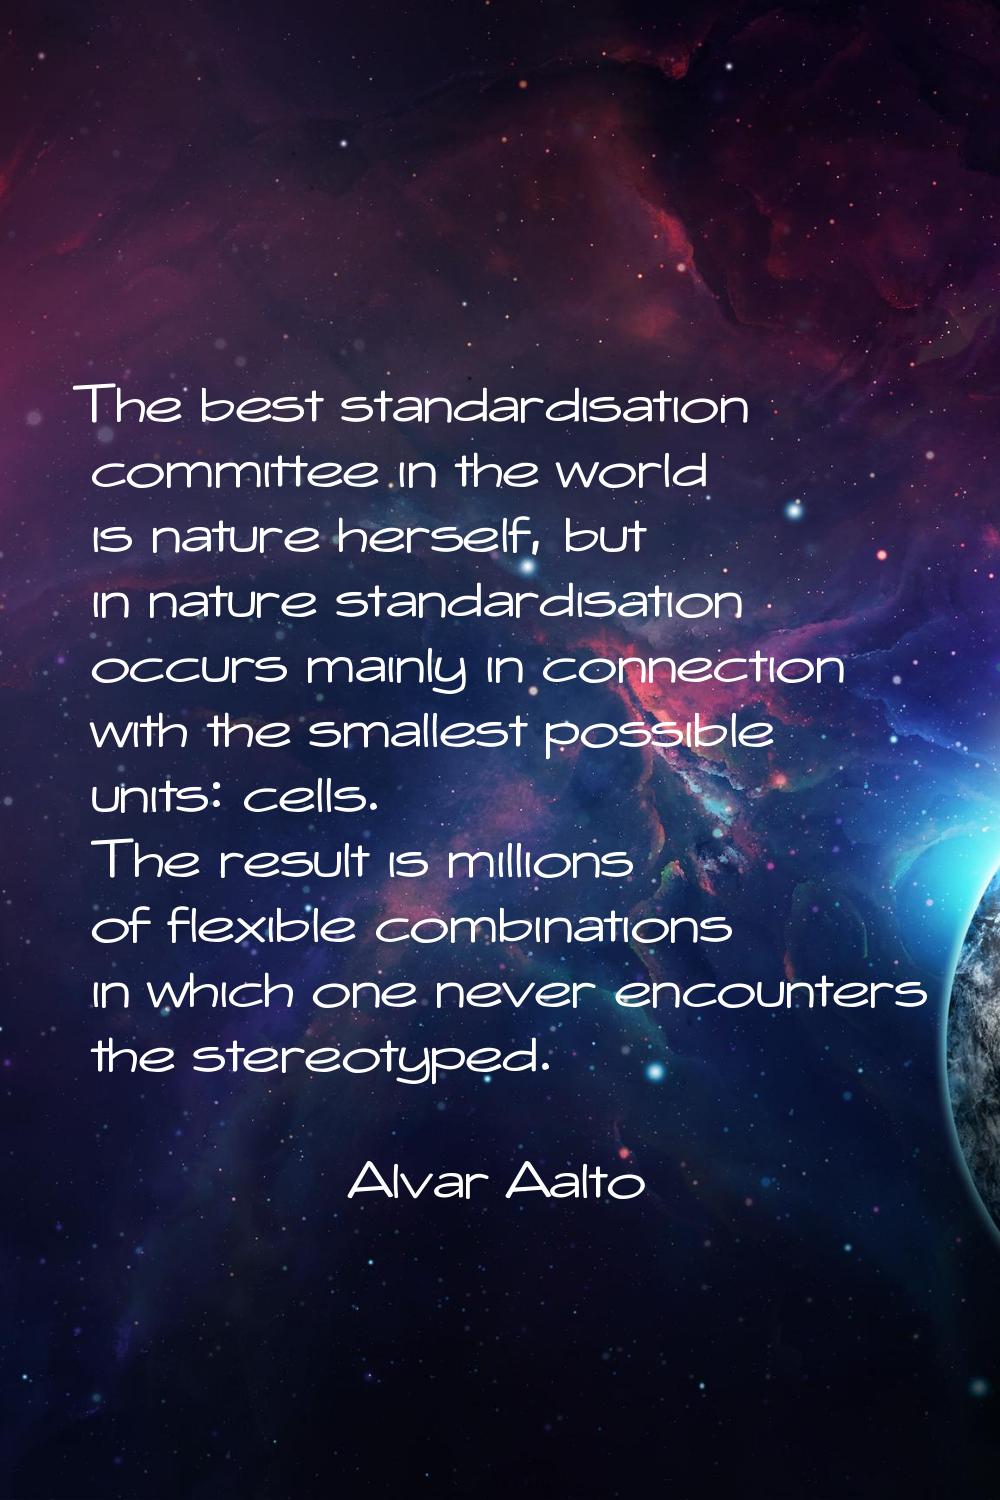 The best standardisation committee in the world is nature herself, but in nature standardisation oc